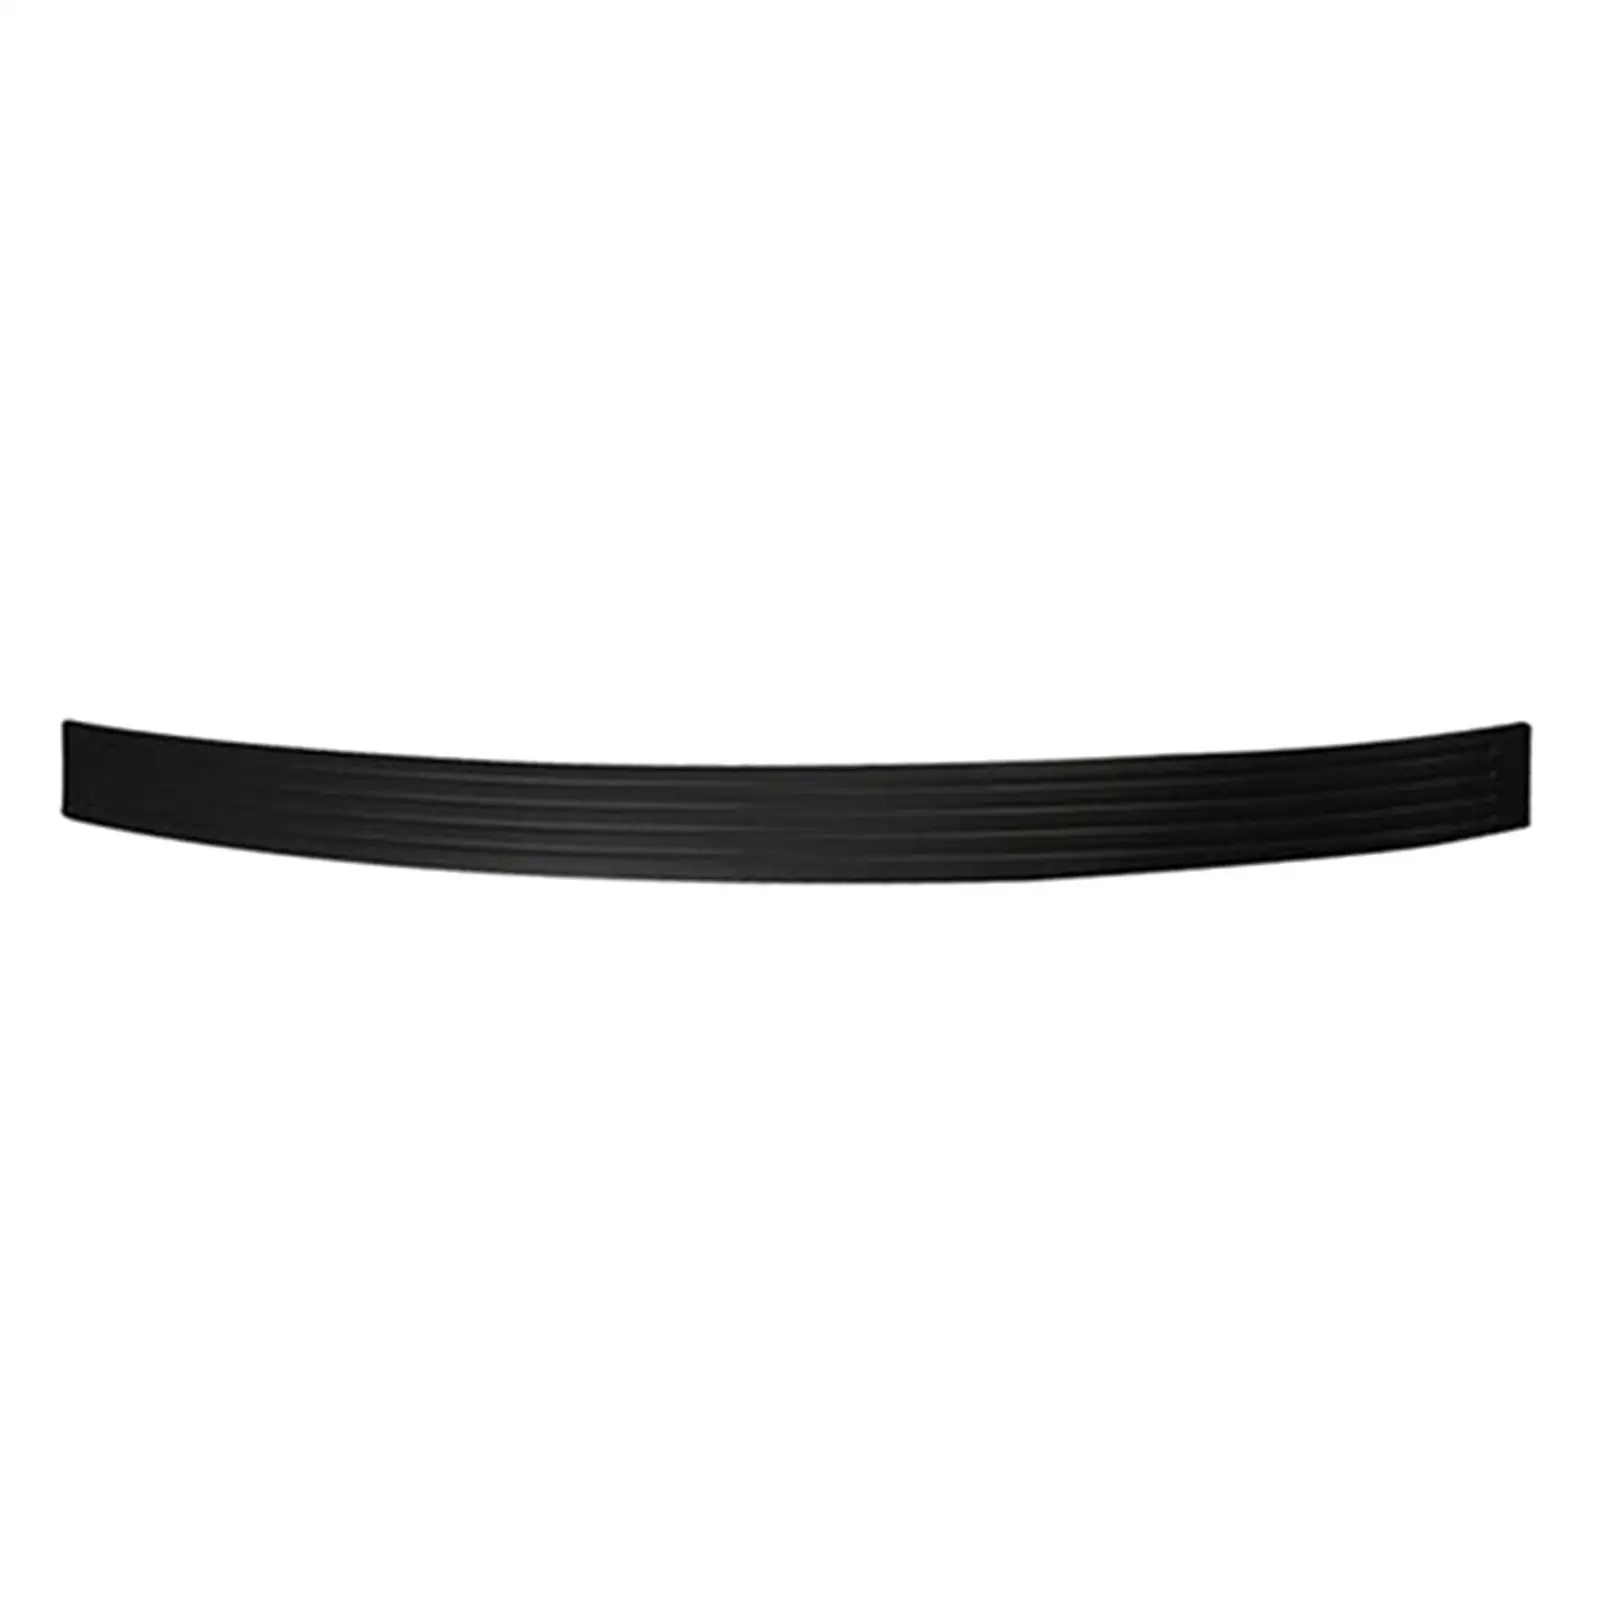 Rear Bumper Protector Guard Rubber Universal Protection for Car Easy to Install